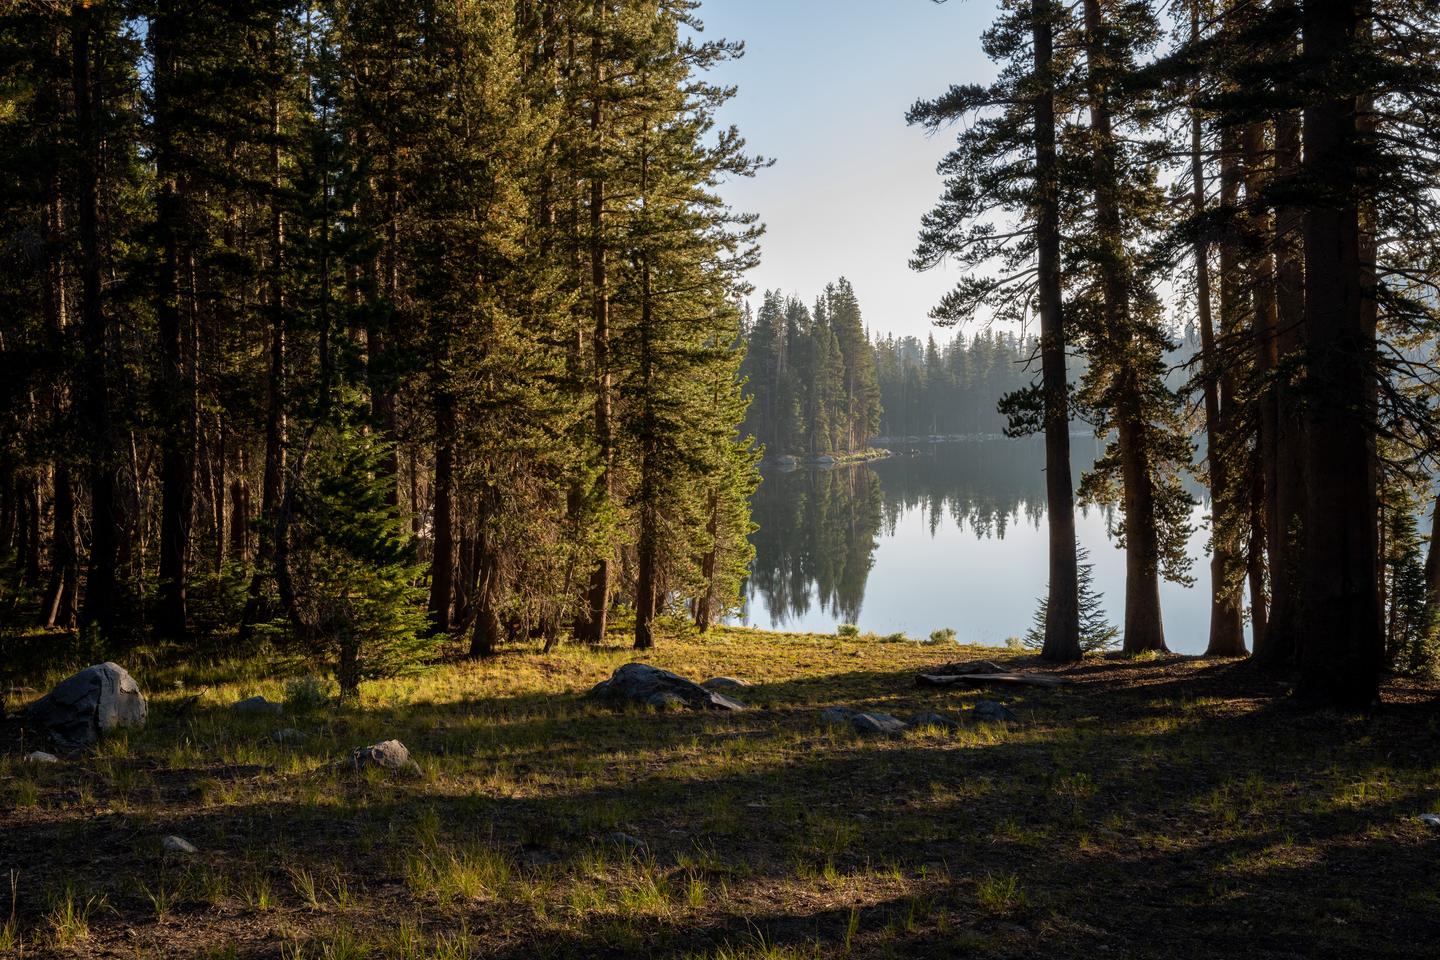 View of lake in between trees with a meadow in the foregroundEarly morning light at a quiet lake in Yosemite Wilderness. 